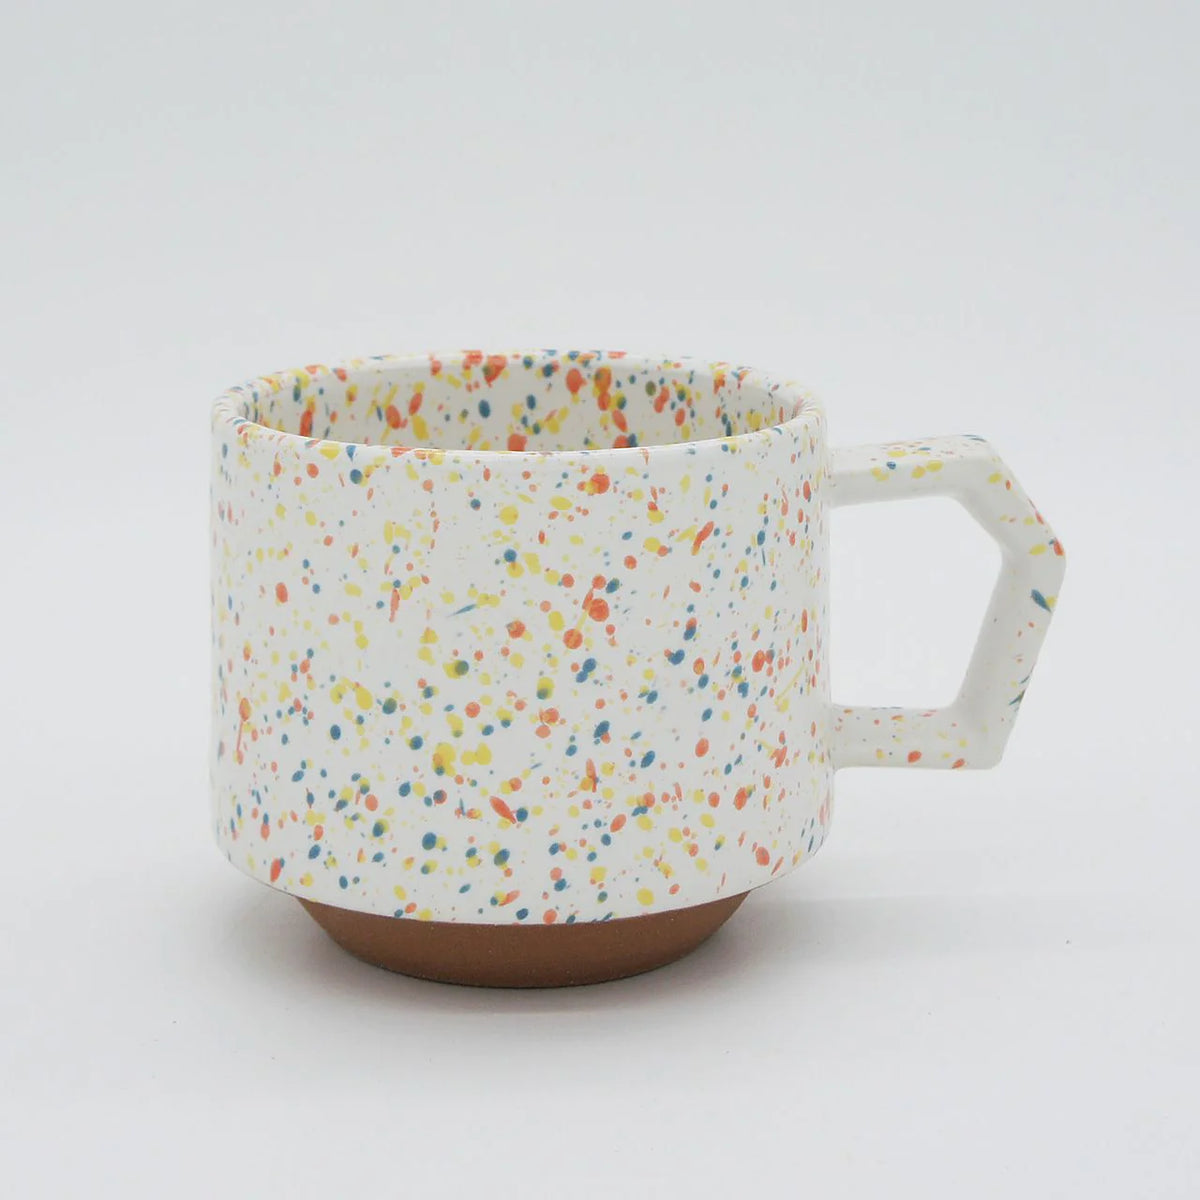 A Stacking Mug - Speckled White with a handle on a white surface.